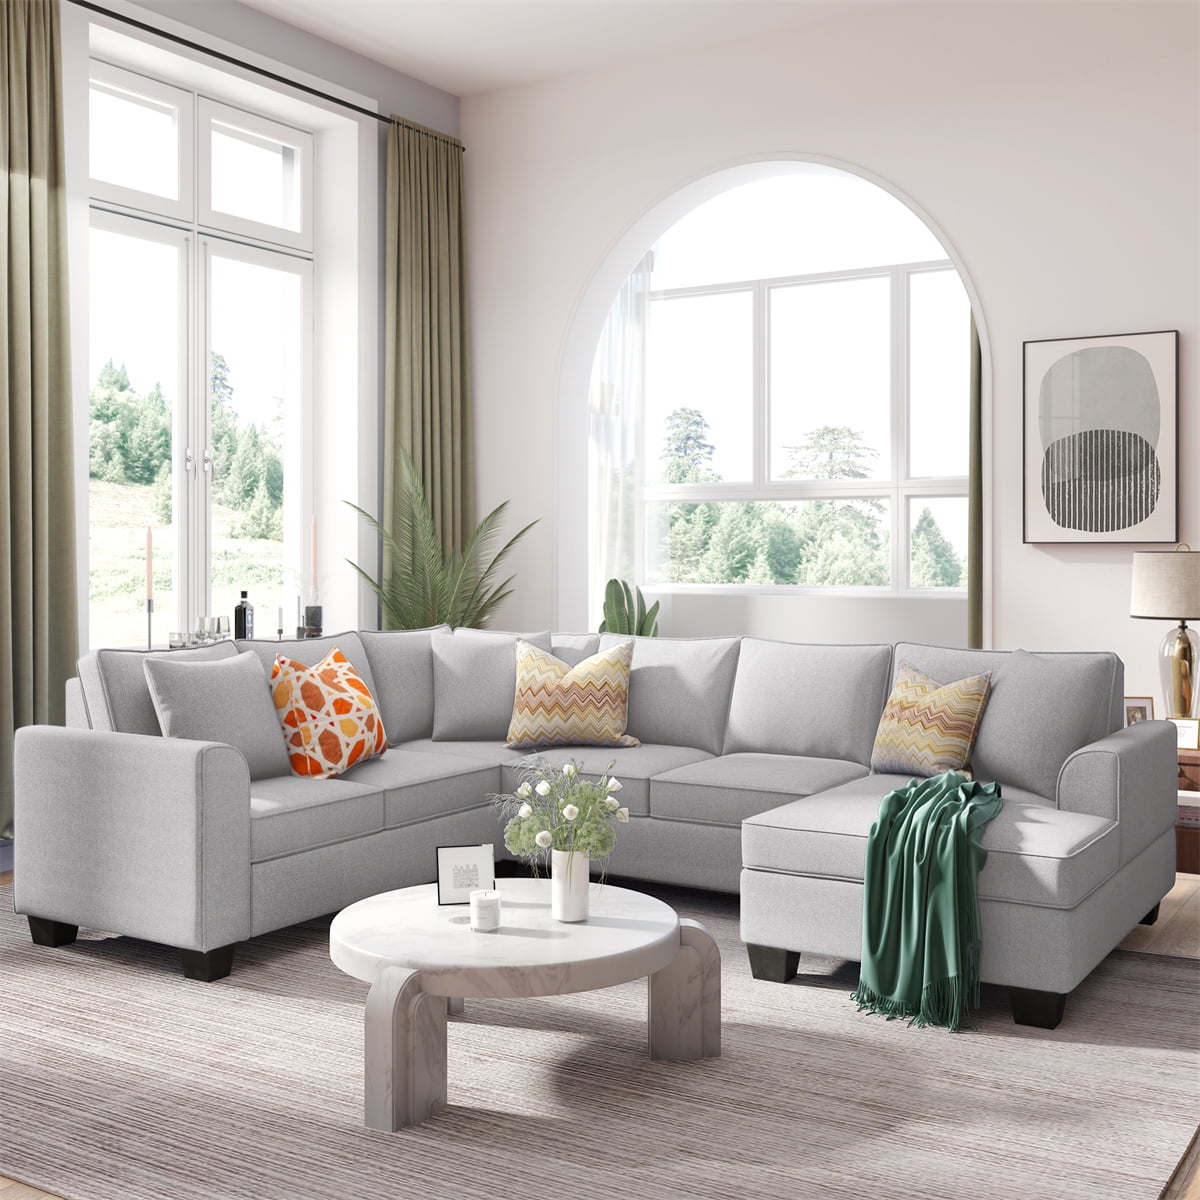 rattle Miscellaneous goods theory 110" * 86" Sectional Sofa, Upholstered Modern English Arm Classic U-Shaped  Sofa, 3 Pillows Included, 7-Seat Couch Modular Sectional Sofa with Chaises  for Living Room Apartment, Light Grey - Walmart.com